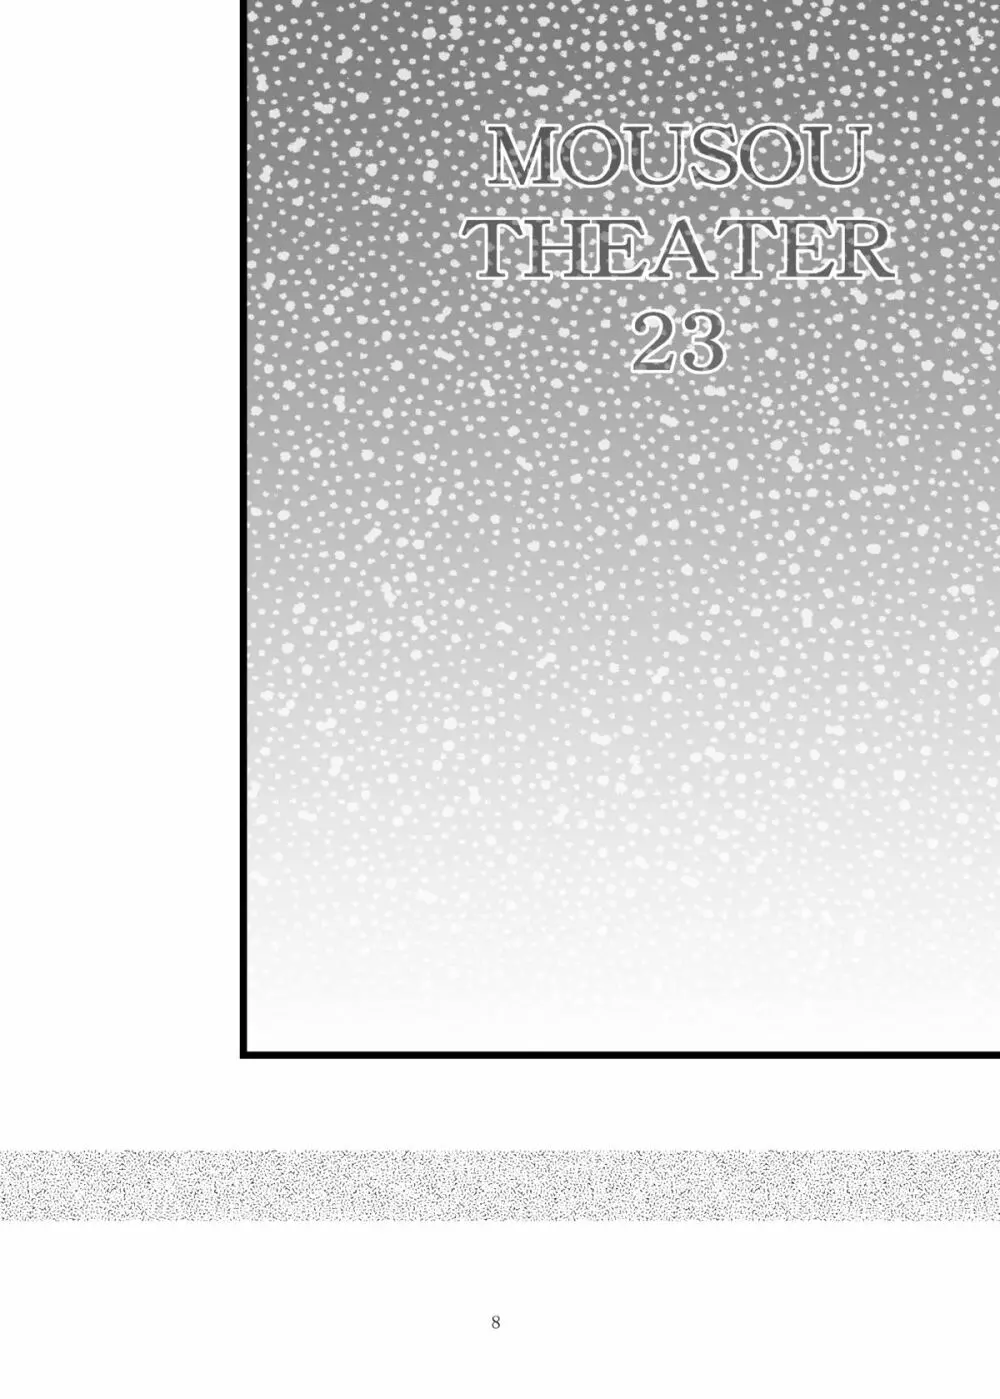 MOUSOU THEATER 23 8ページ